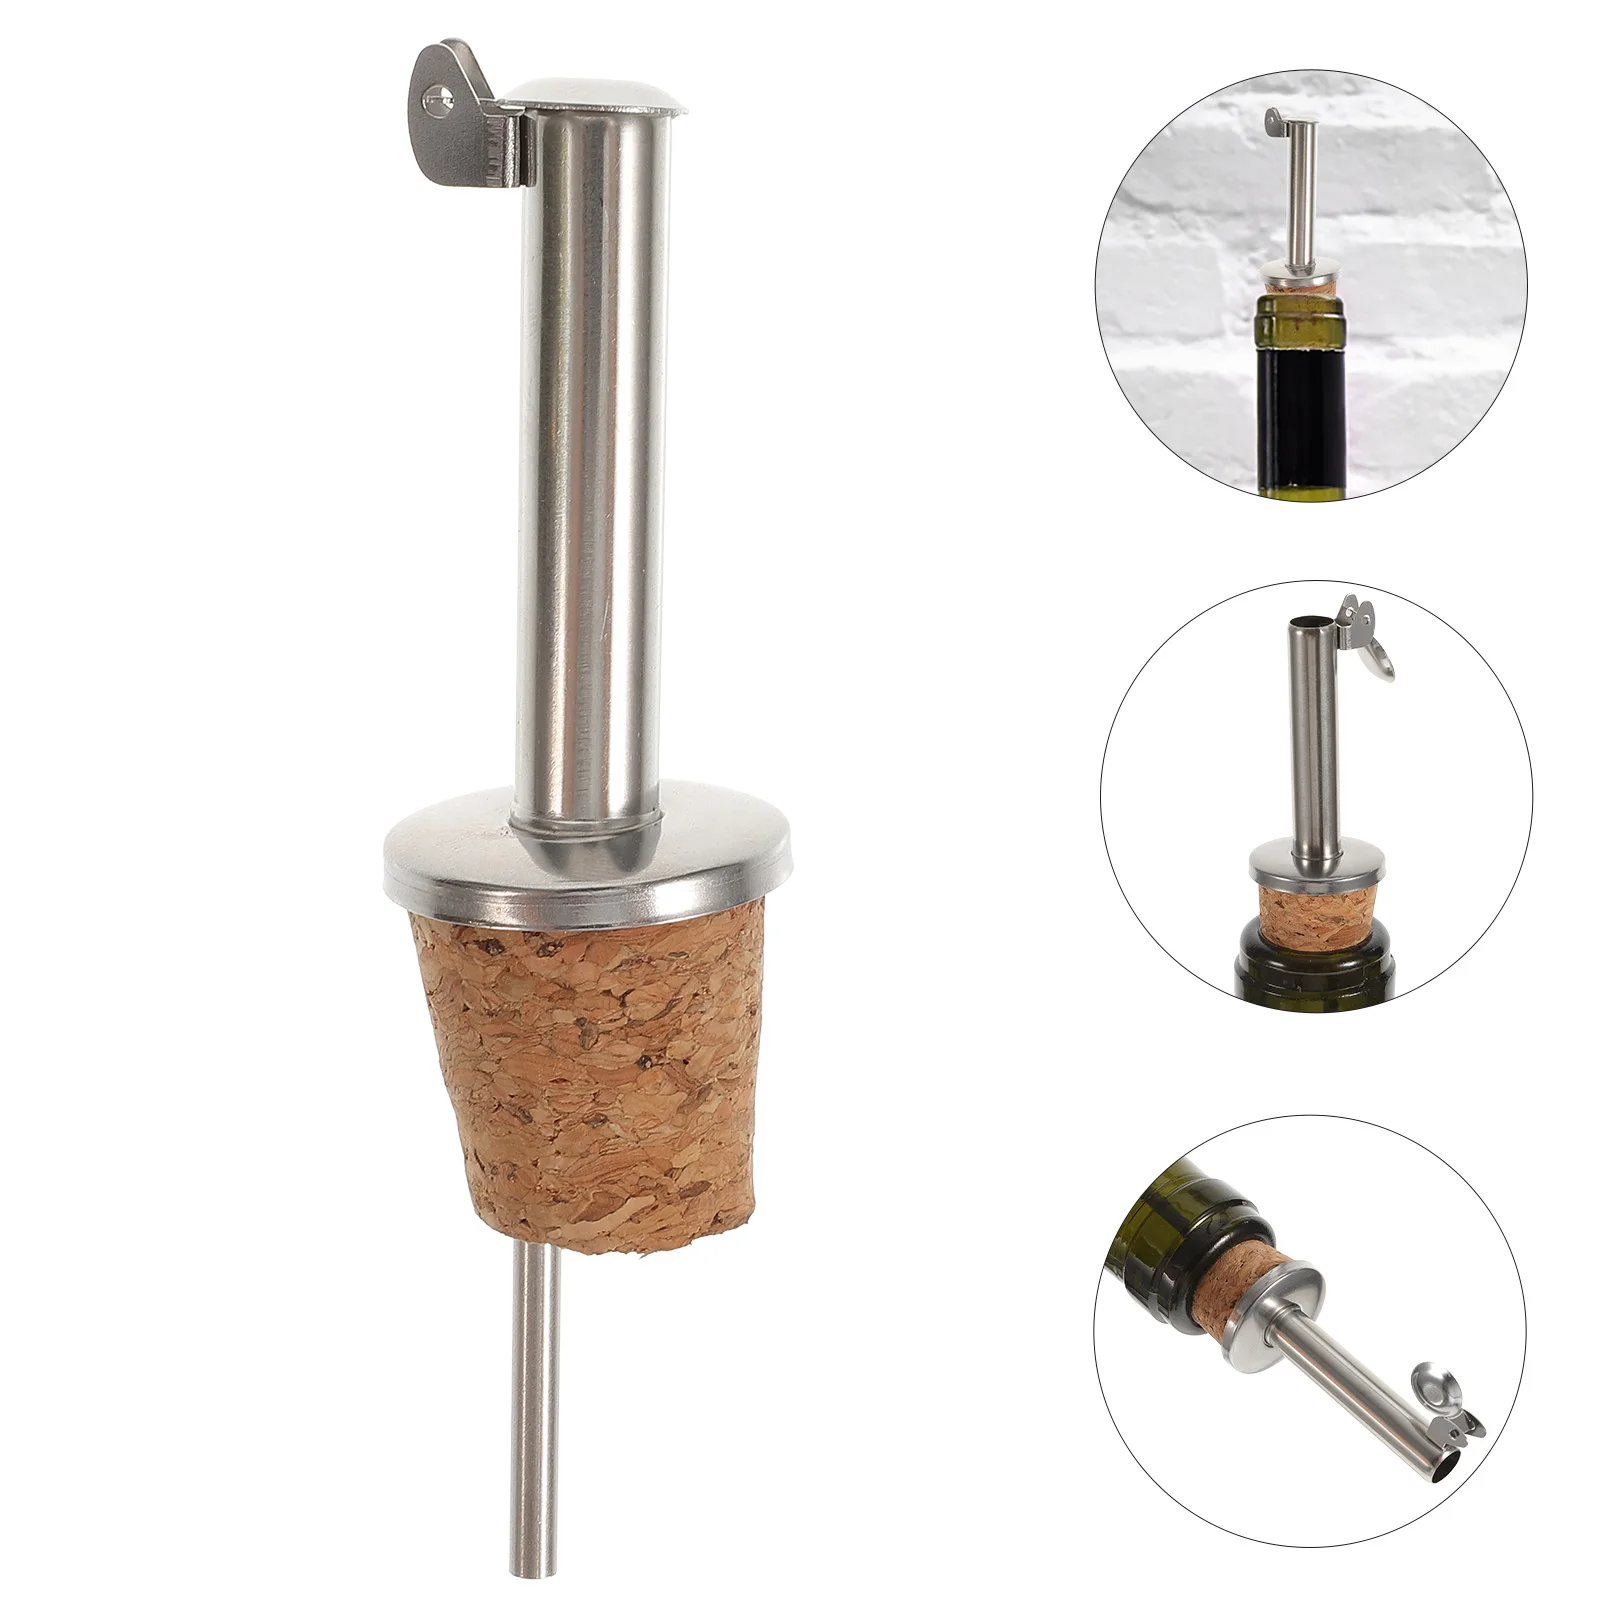 

Pourer Bottle Spout Pourers Stopper Pour Oil Spouts Dispenser Bar Stopping Cork Olive Set Steel Stainless Stoppers Metal Whiskey